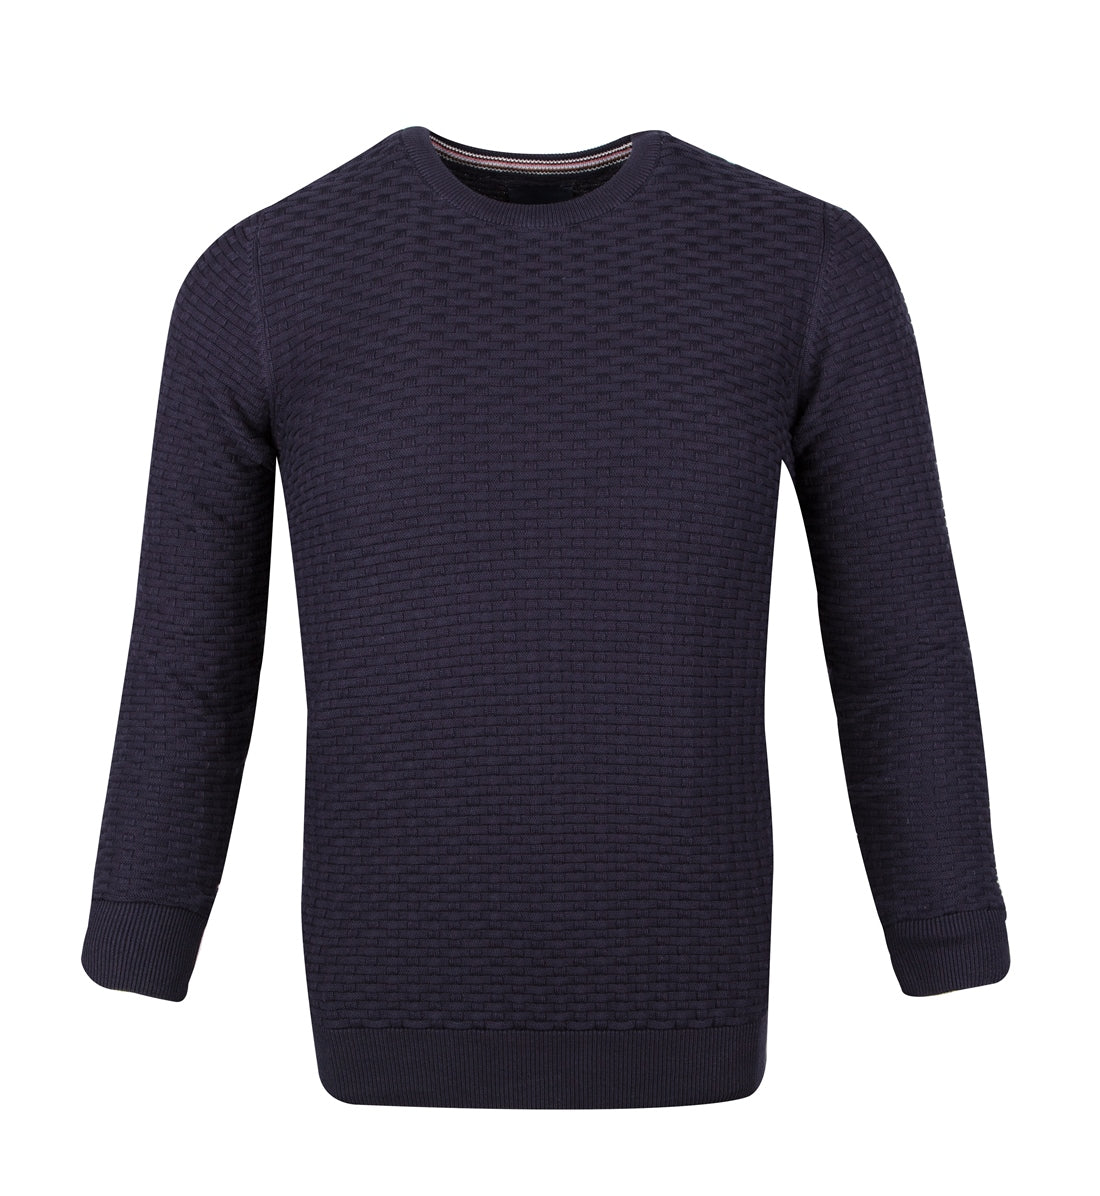 Knitted jacquard crew neck jumper